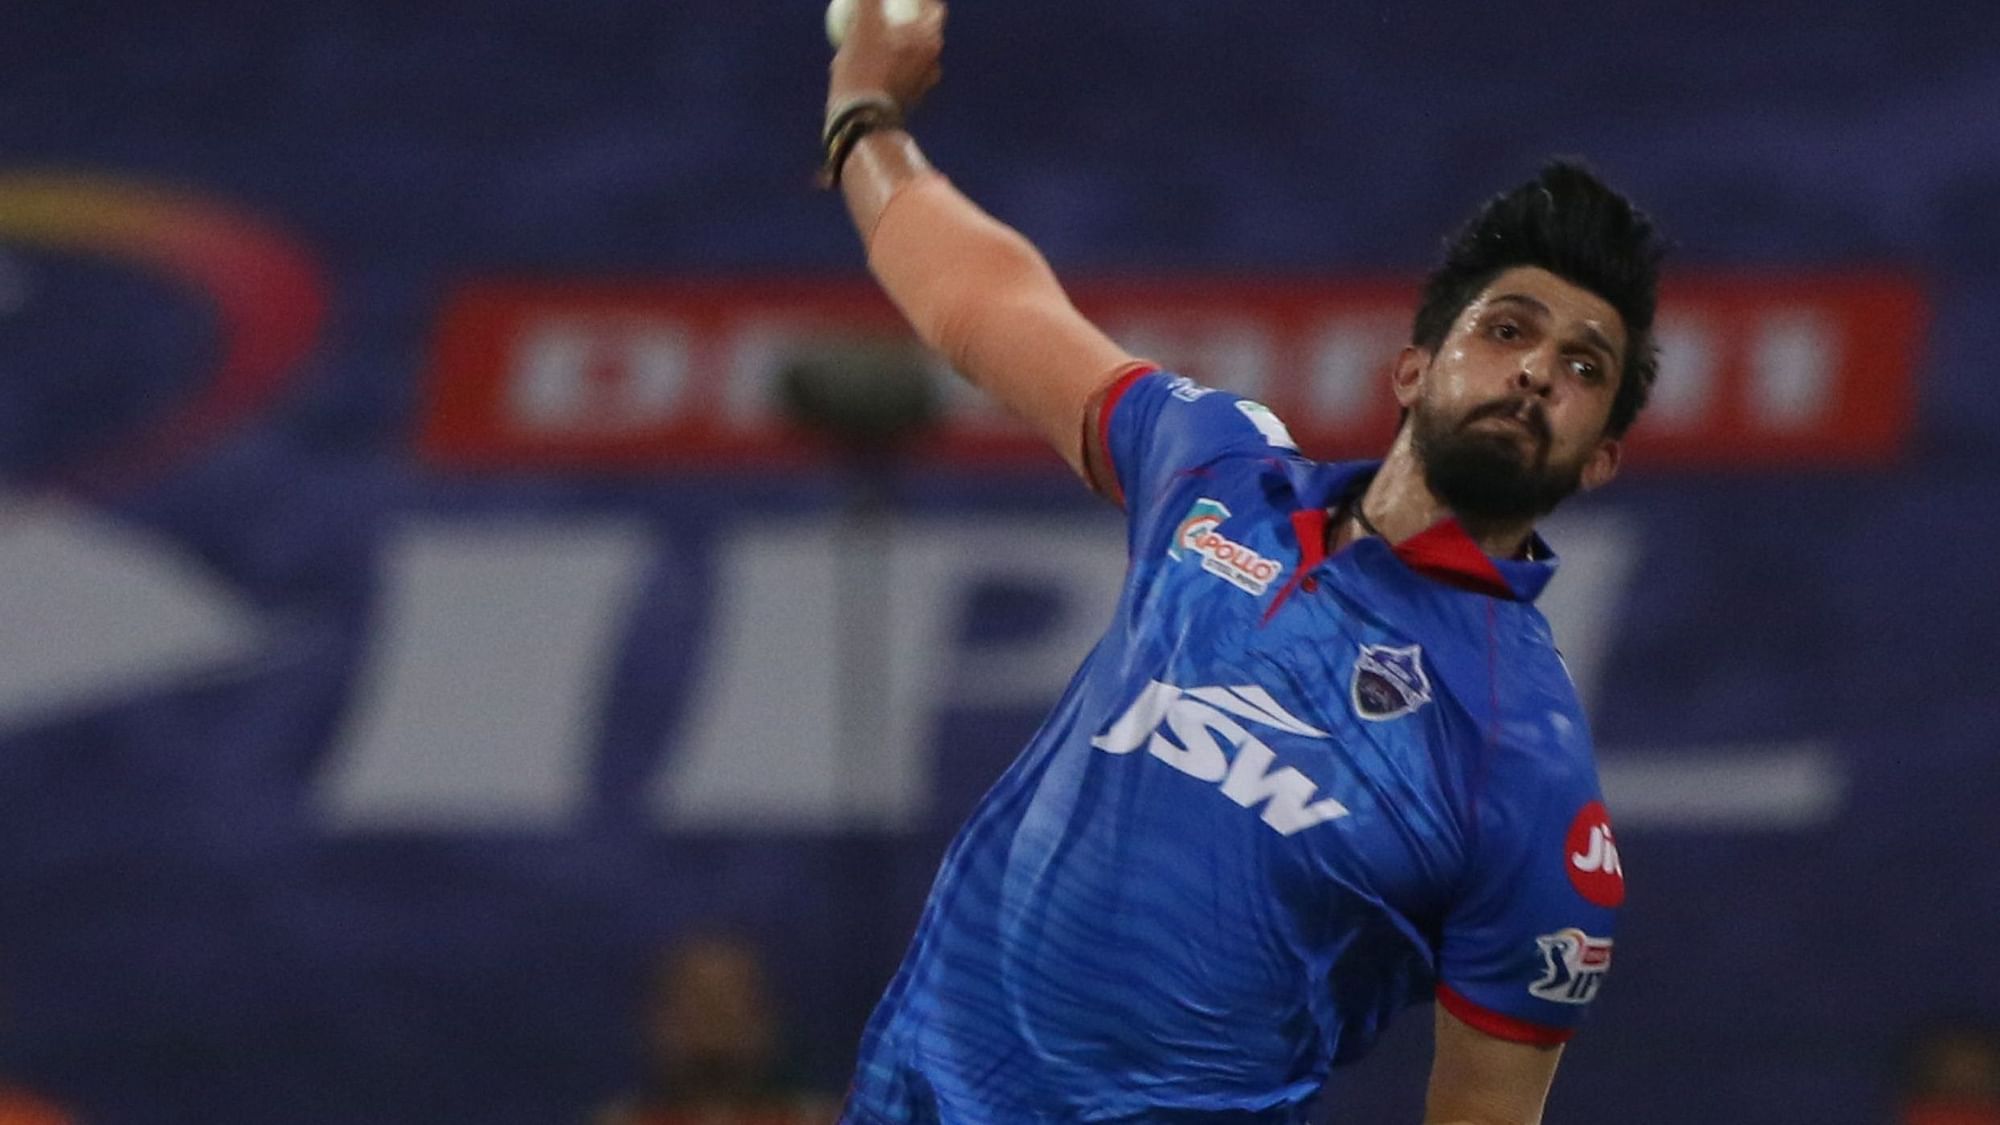 Delhi Capitals’ pacer Ishant Sharma has been ruled out of the rest of the IPL due to an injury.